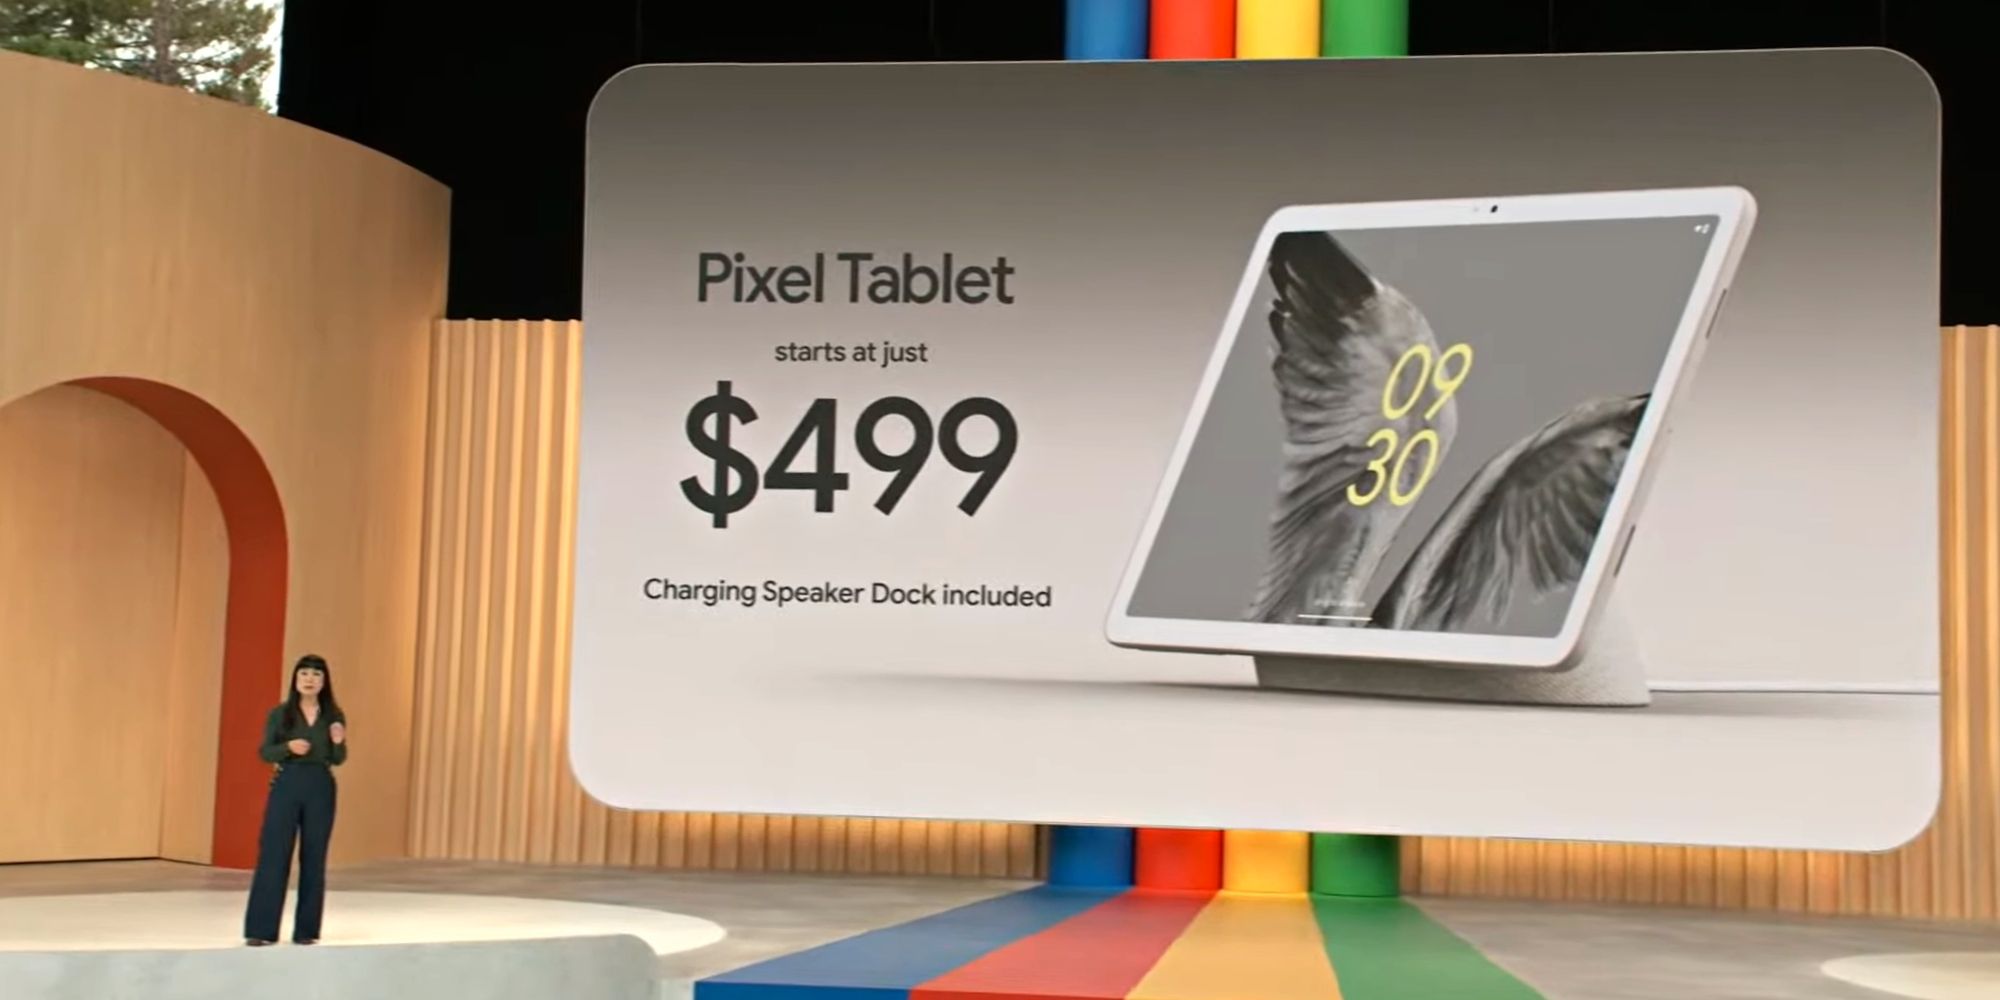 Pixel Tablet revealed at the Google IO with price